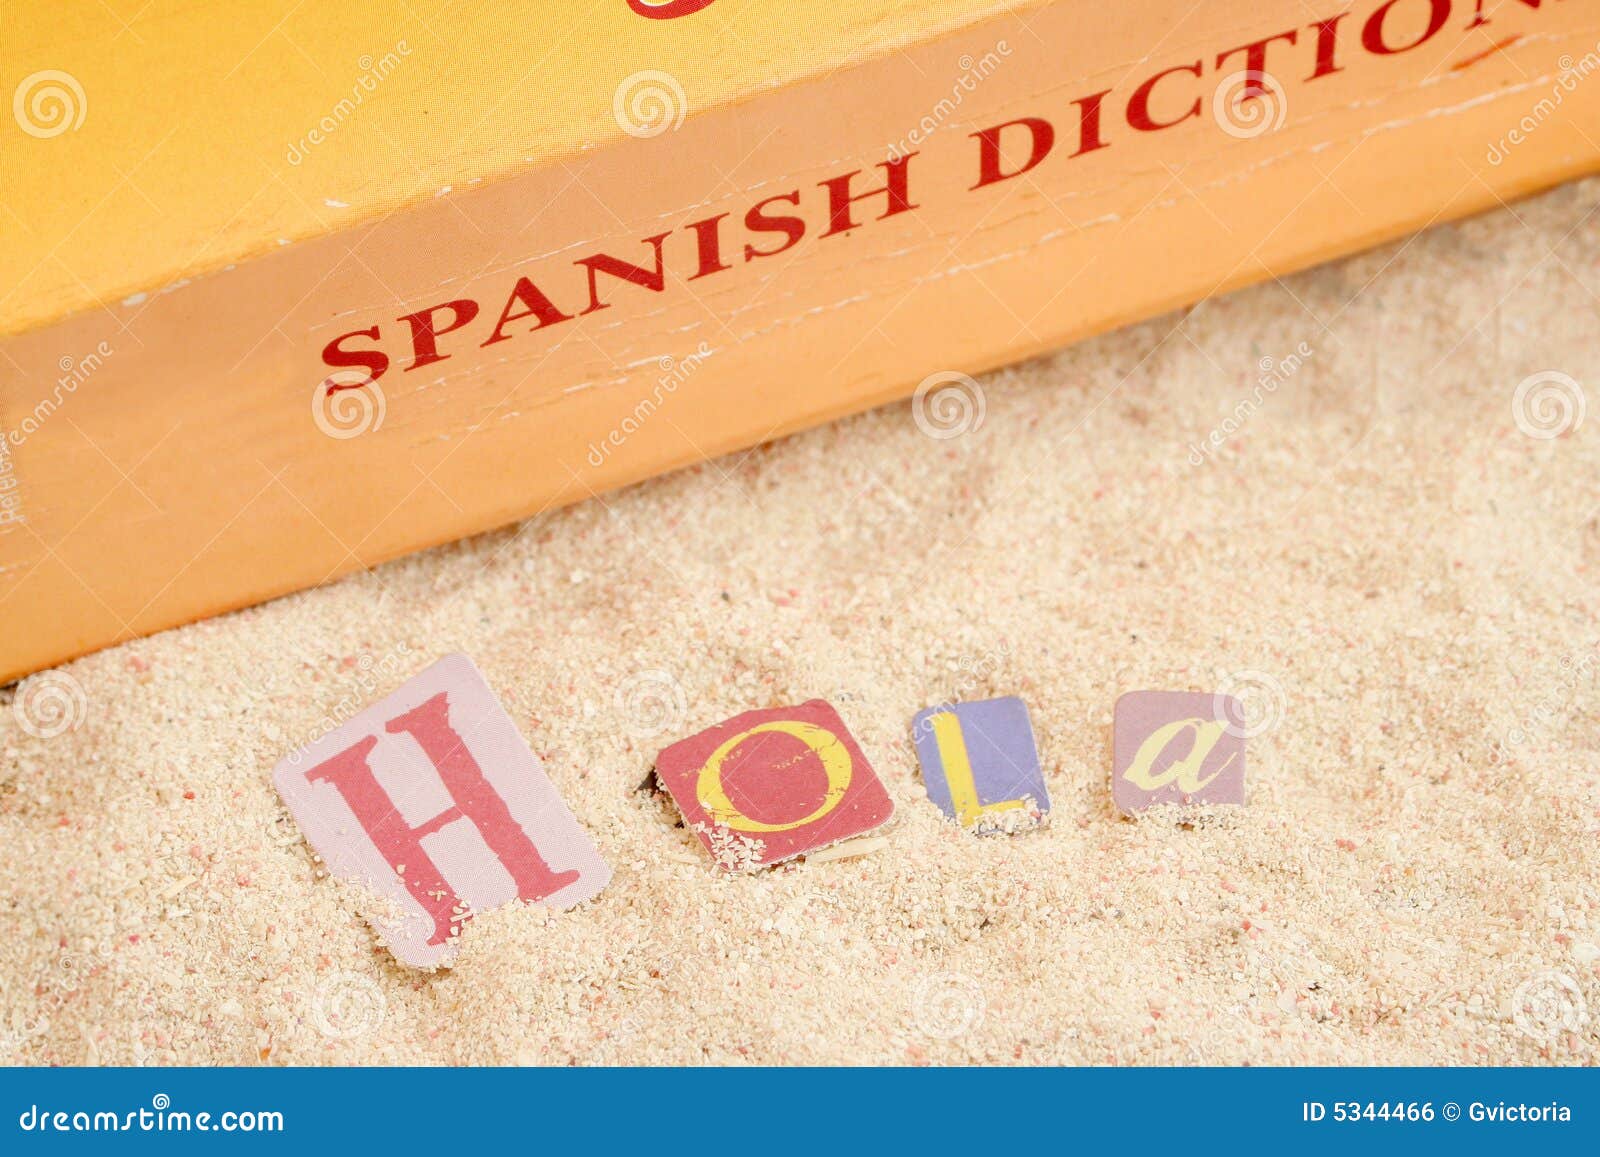 Wednesday In Spanish Arrow With Beach Background Stock Photo, Picture and  Royalty Free Image. Image 49125471.